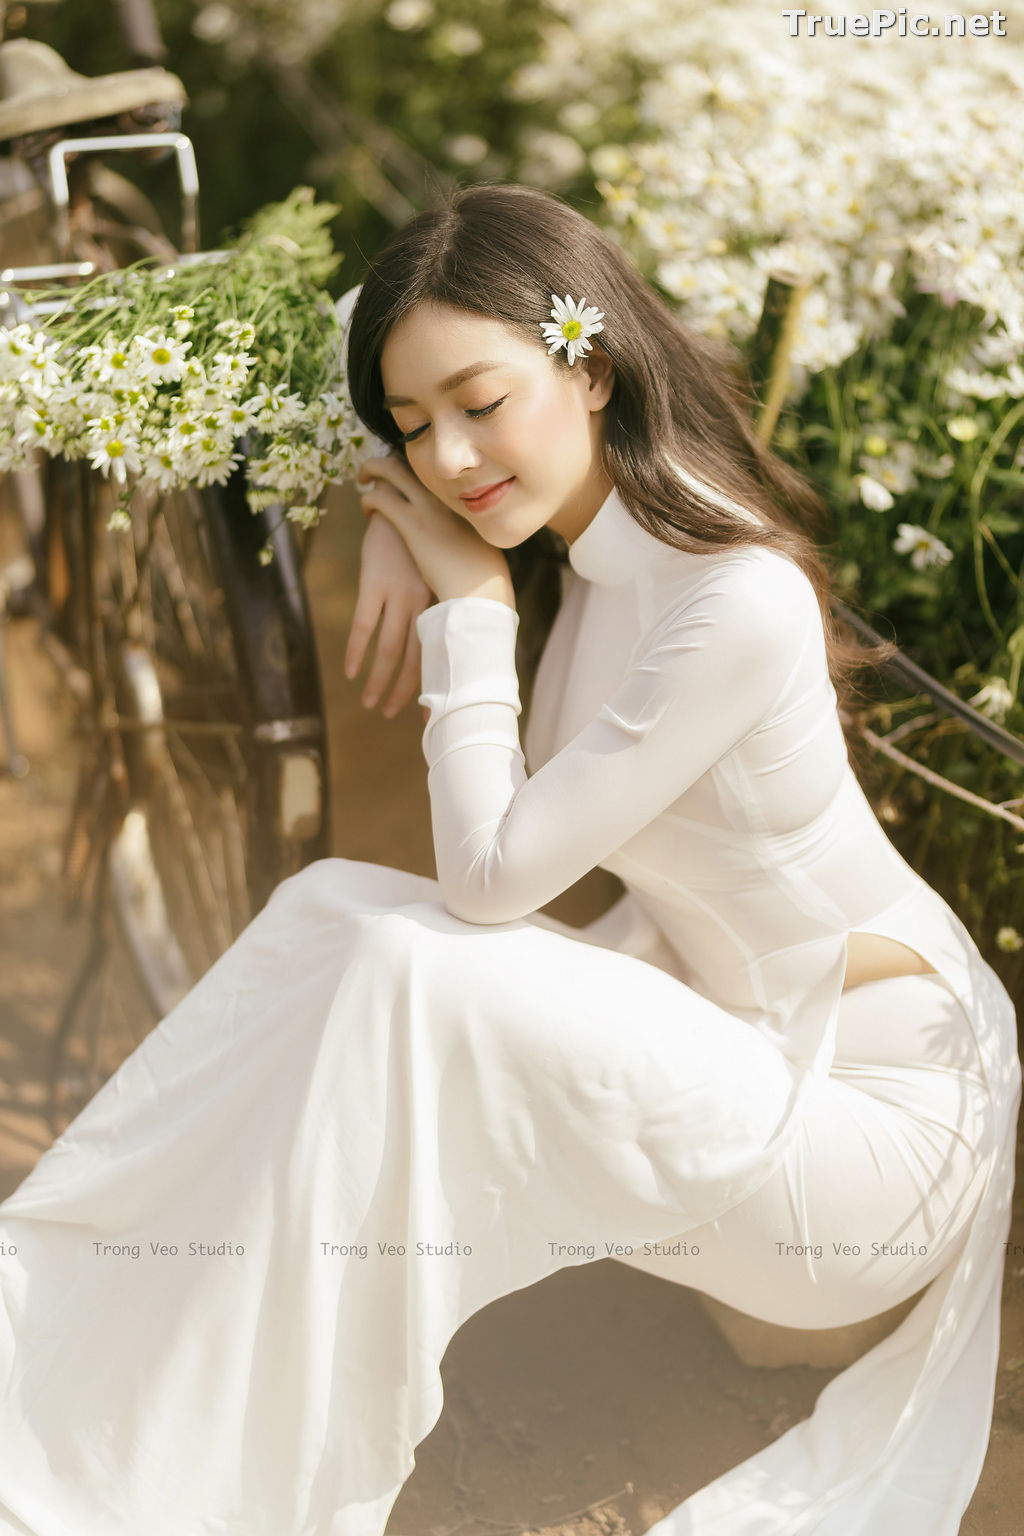 Image The Beauty of Vietnamese Girls with Traditional Dress (Ao Dai) #3 - TruePic.net - Picture-30